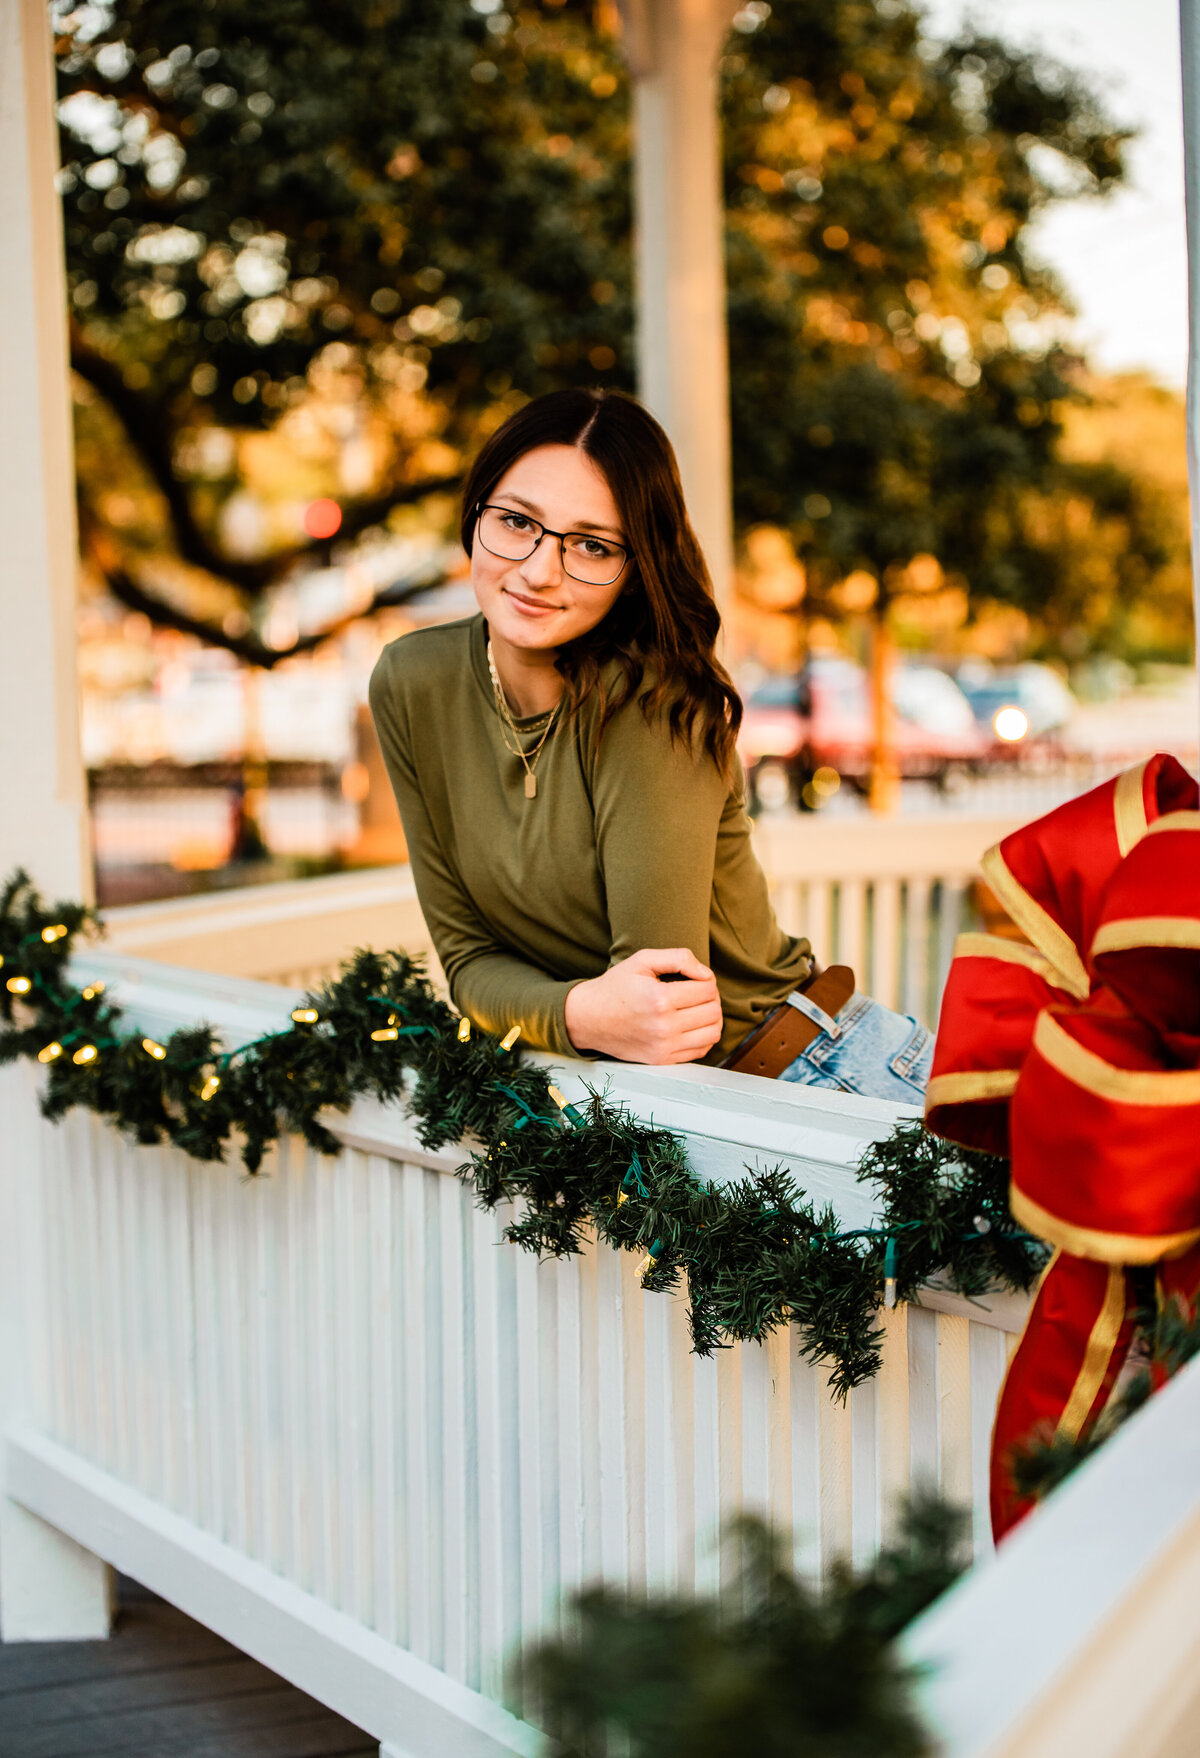 A senior girl leans over a white gazebo railing that is decorated with Christmas garland,